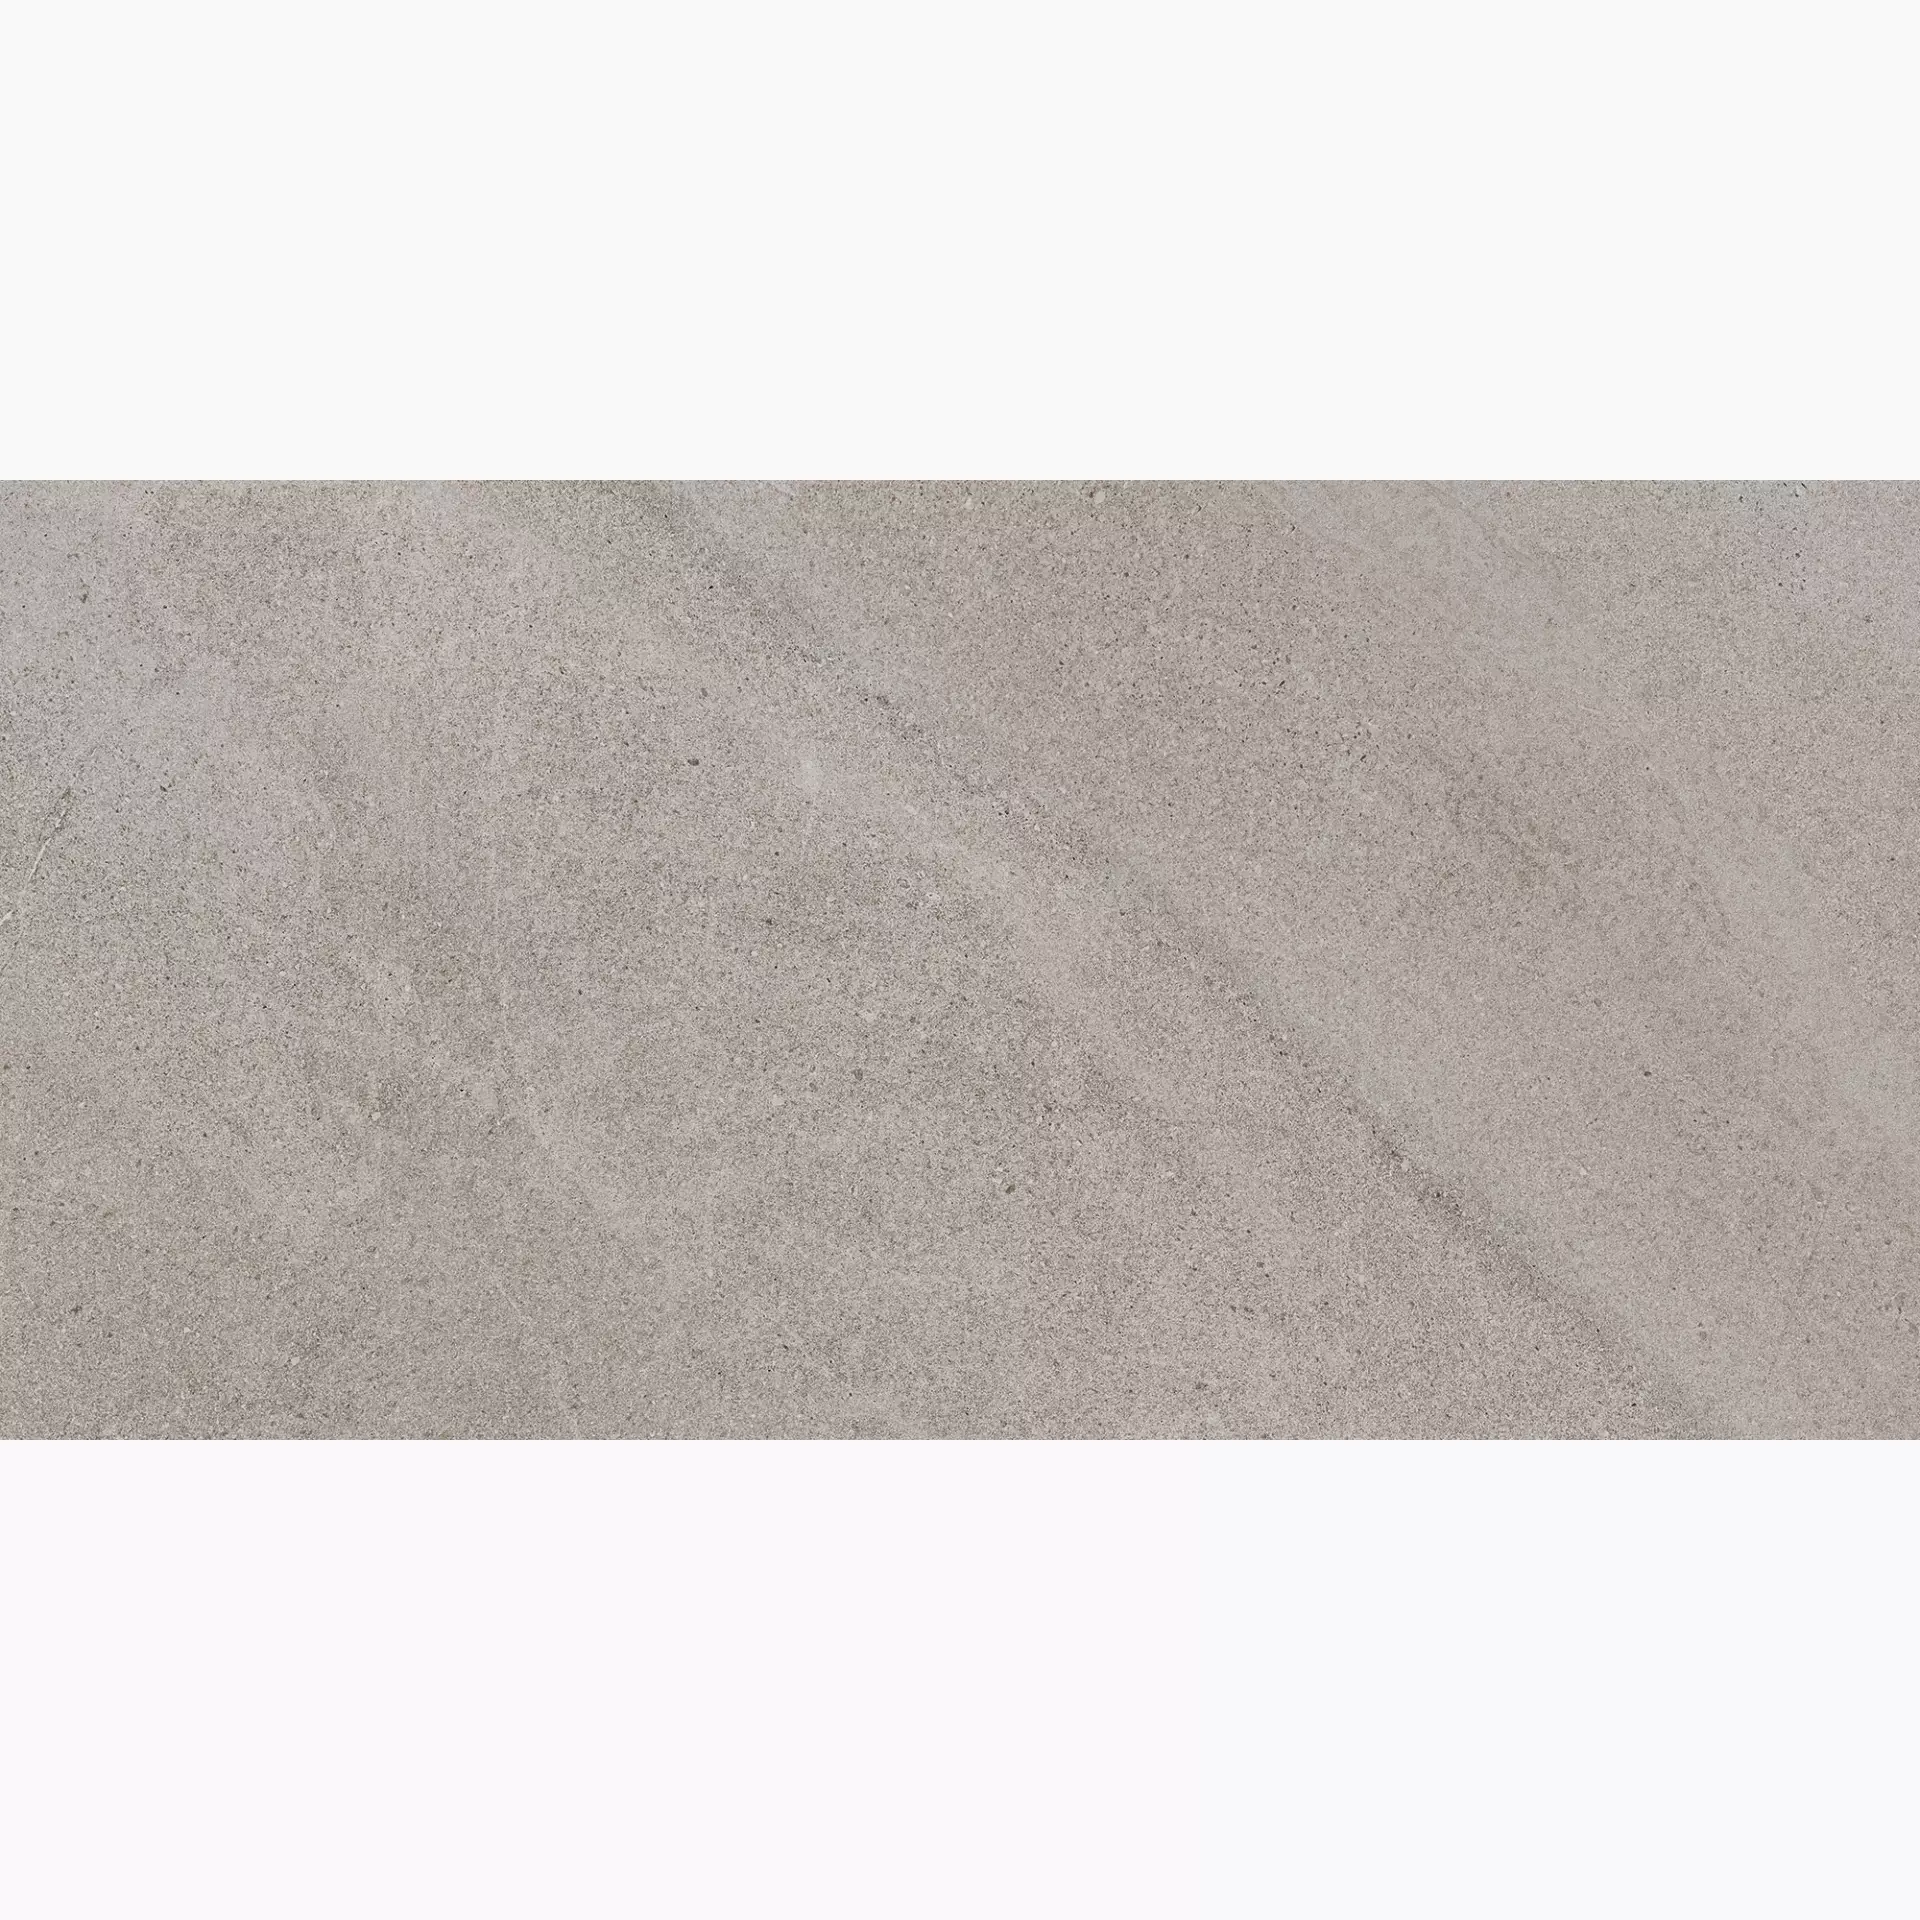 Cottodeste Limestone Oyster Honed Protect EG-LSH2 30x60cm rectified 14mm